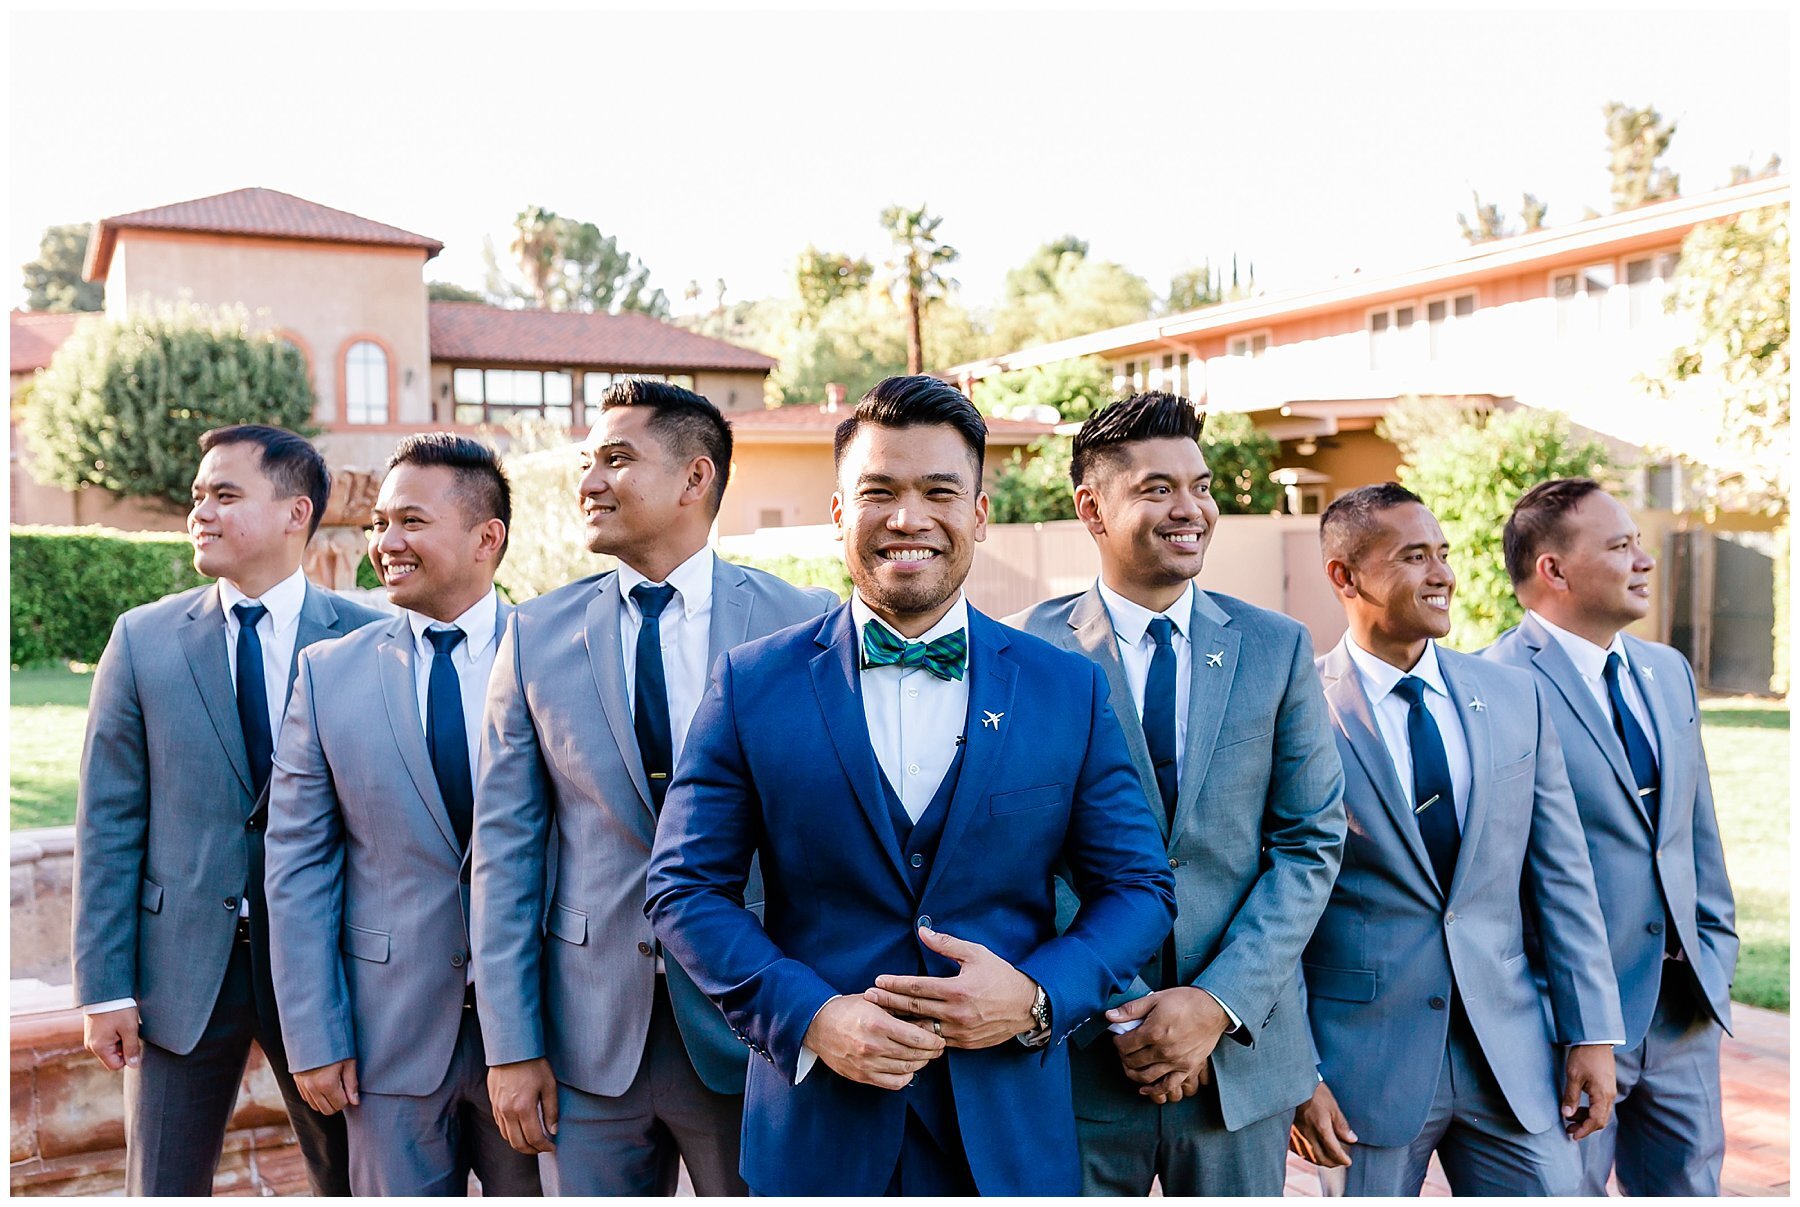  groomsmen outside the church together 